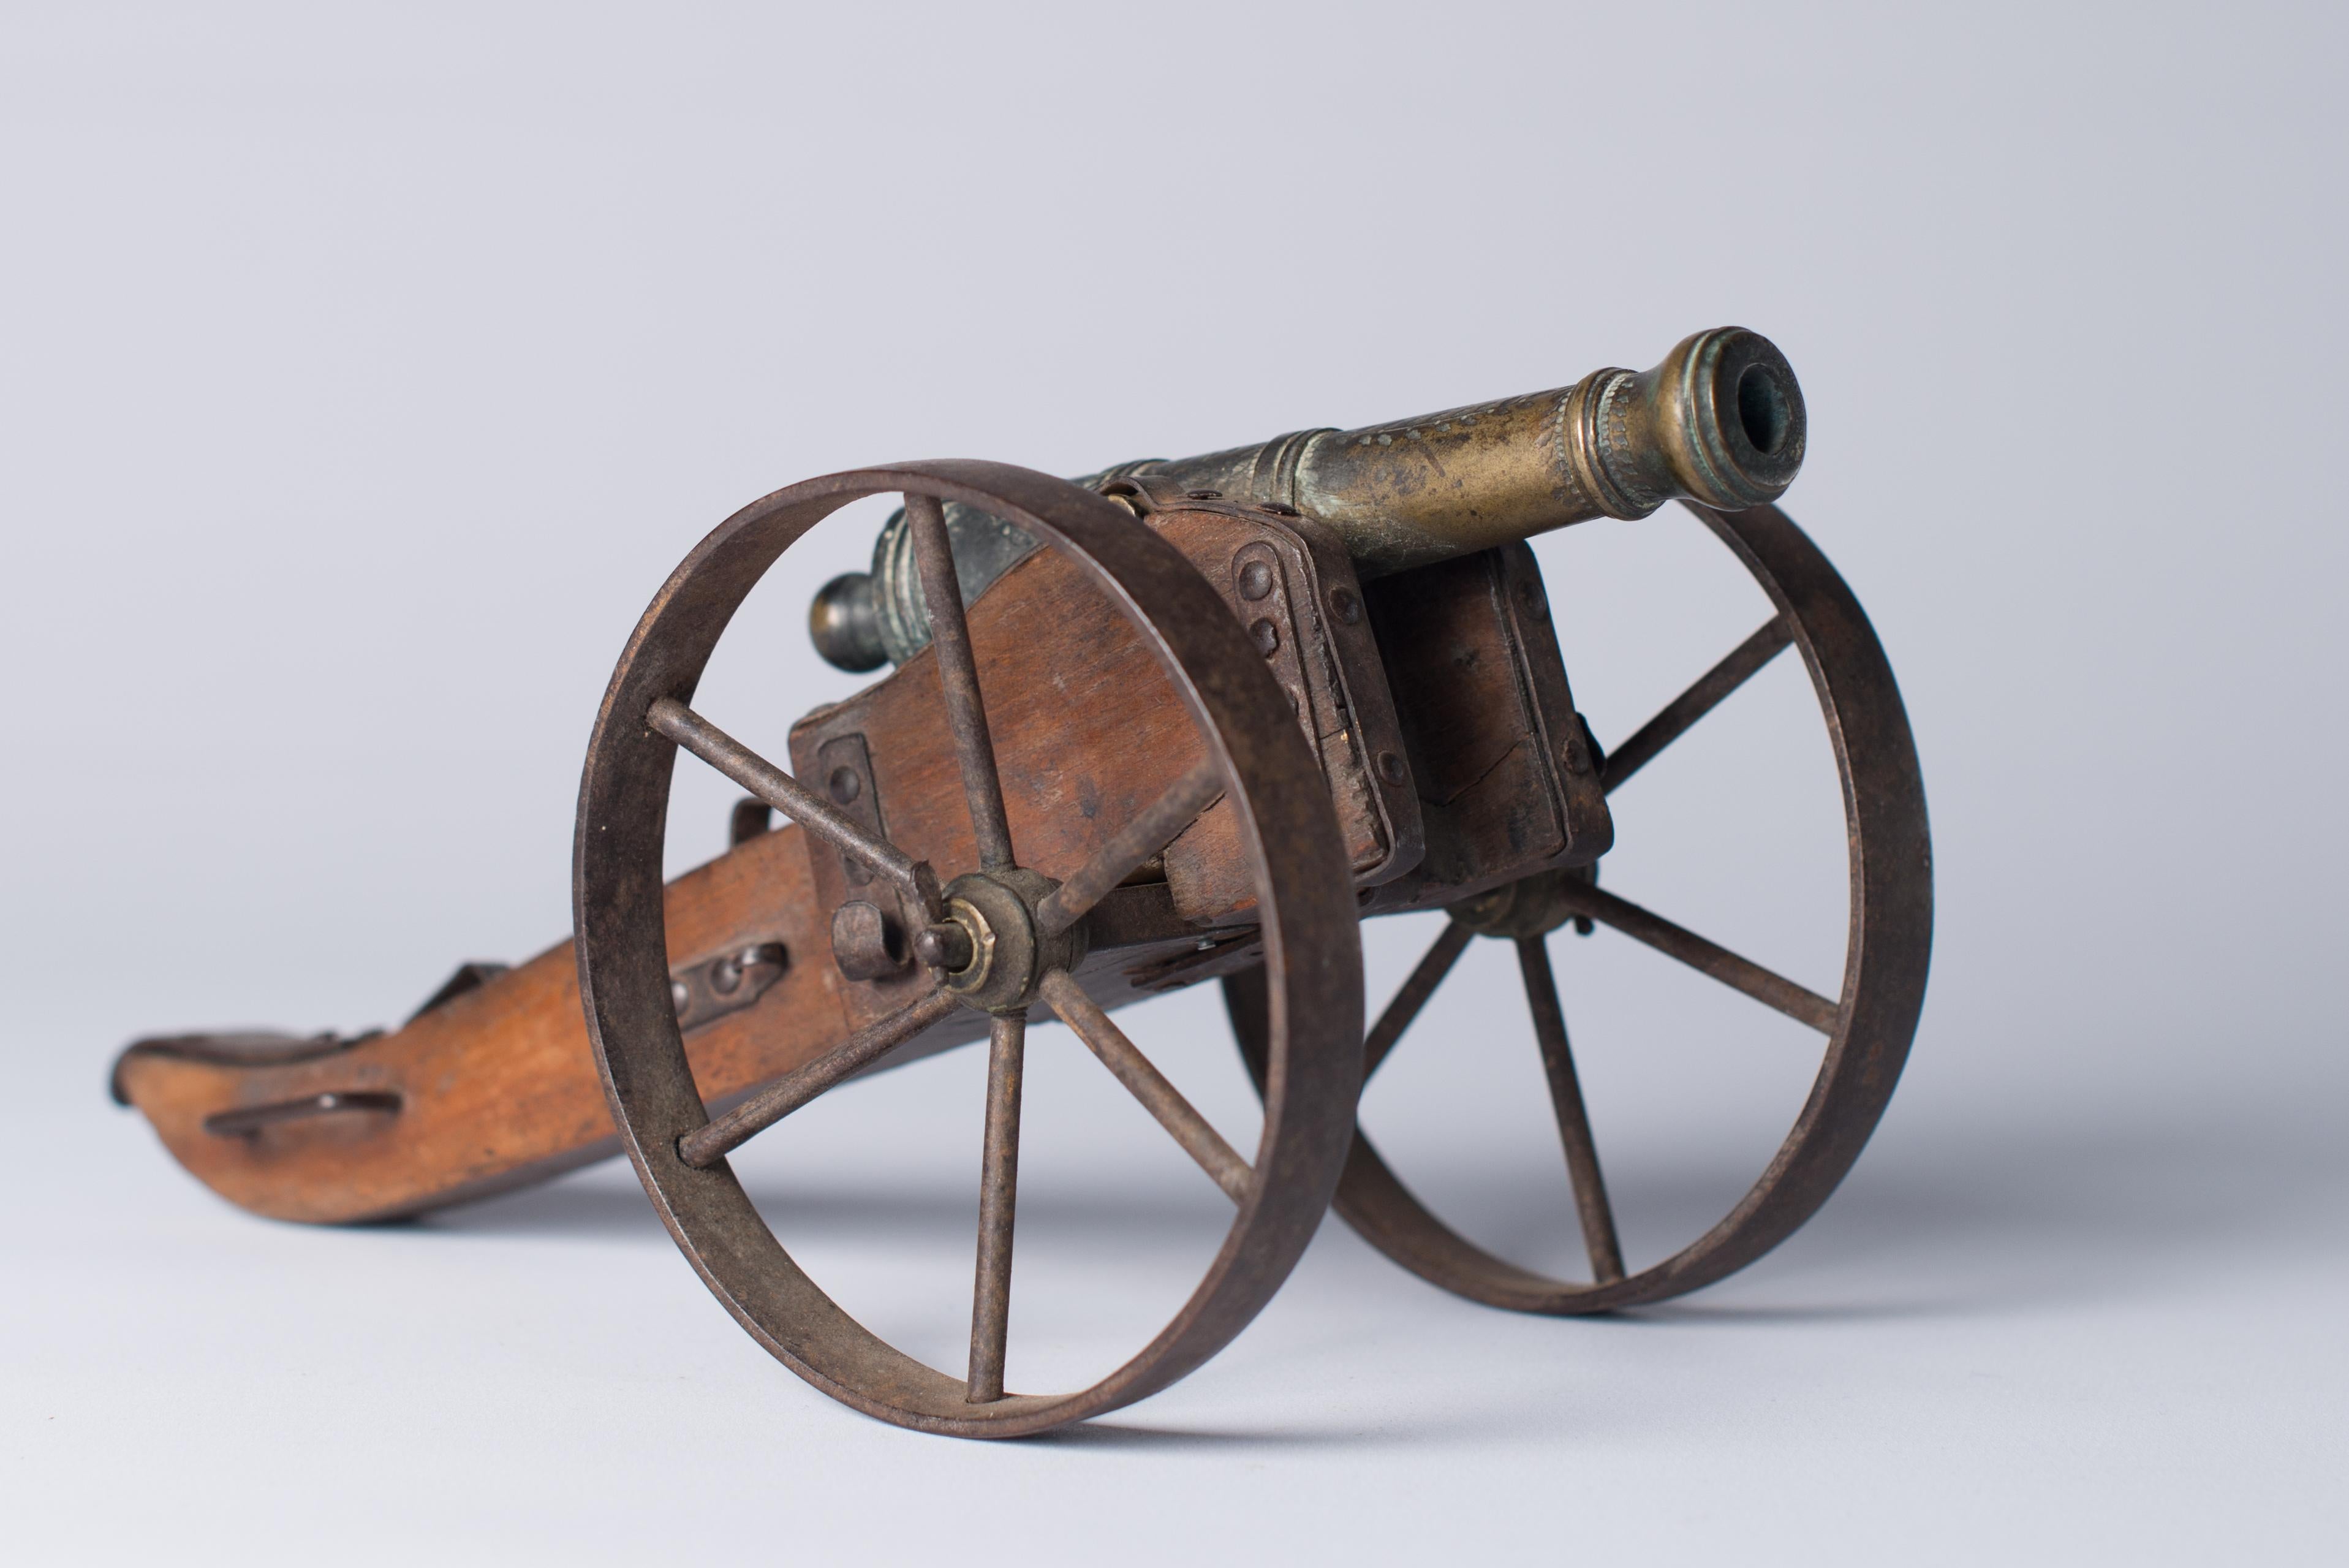 Victorian Miniature Patinated Bronze Canon on a Wooden Field Gun-Carriage, 19th Century